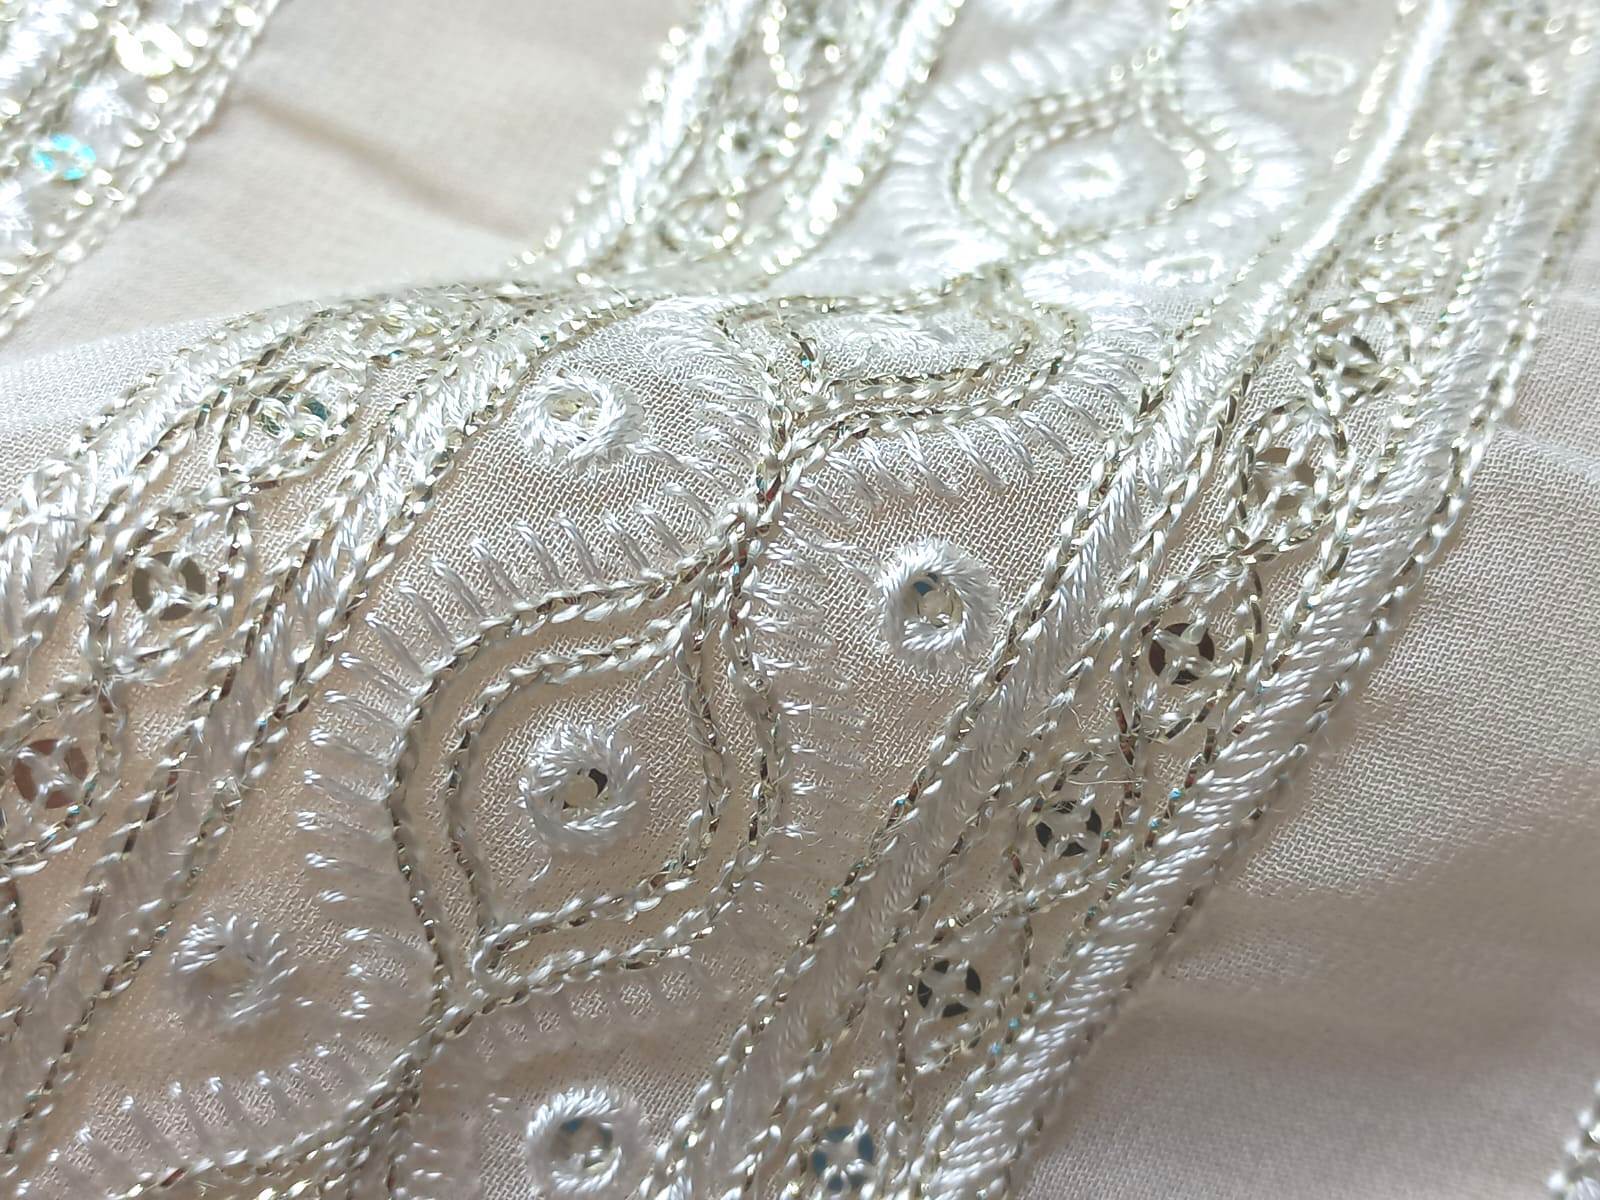 Embroidered Chain Stitch Lace Fabric